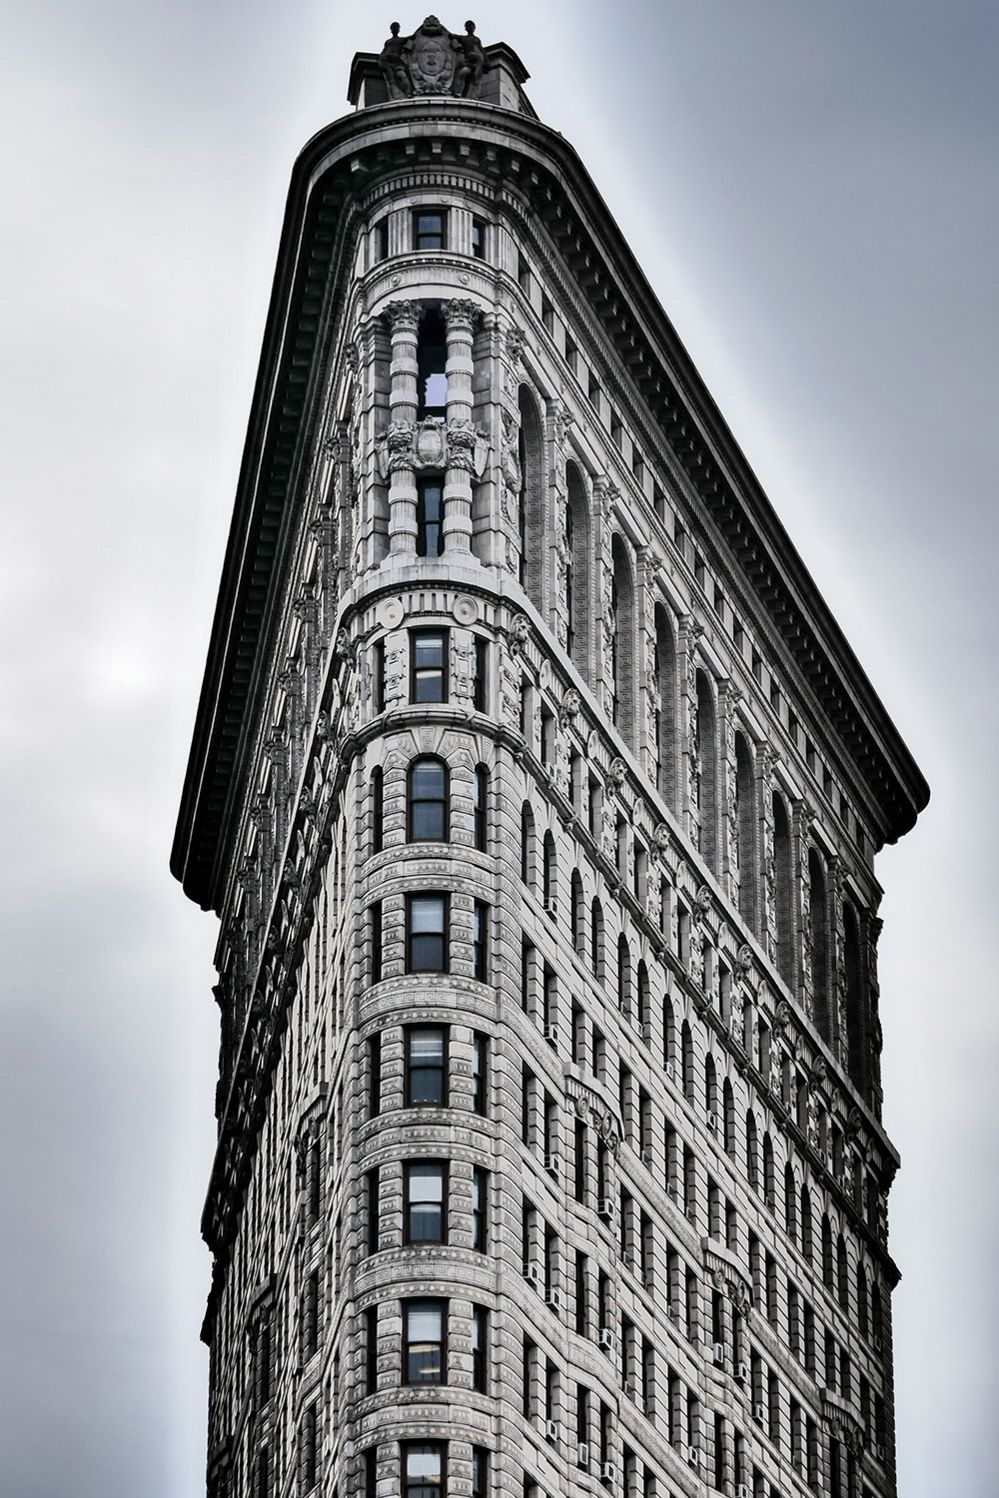 A view of New York City's iconic Flatiron Building